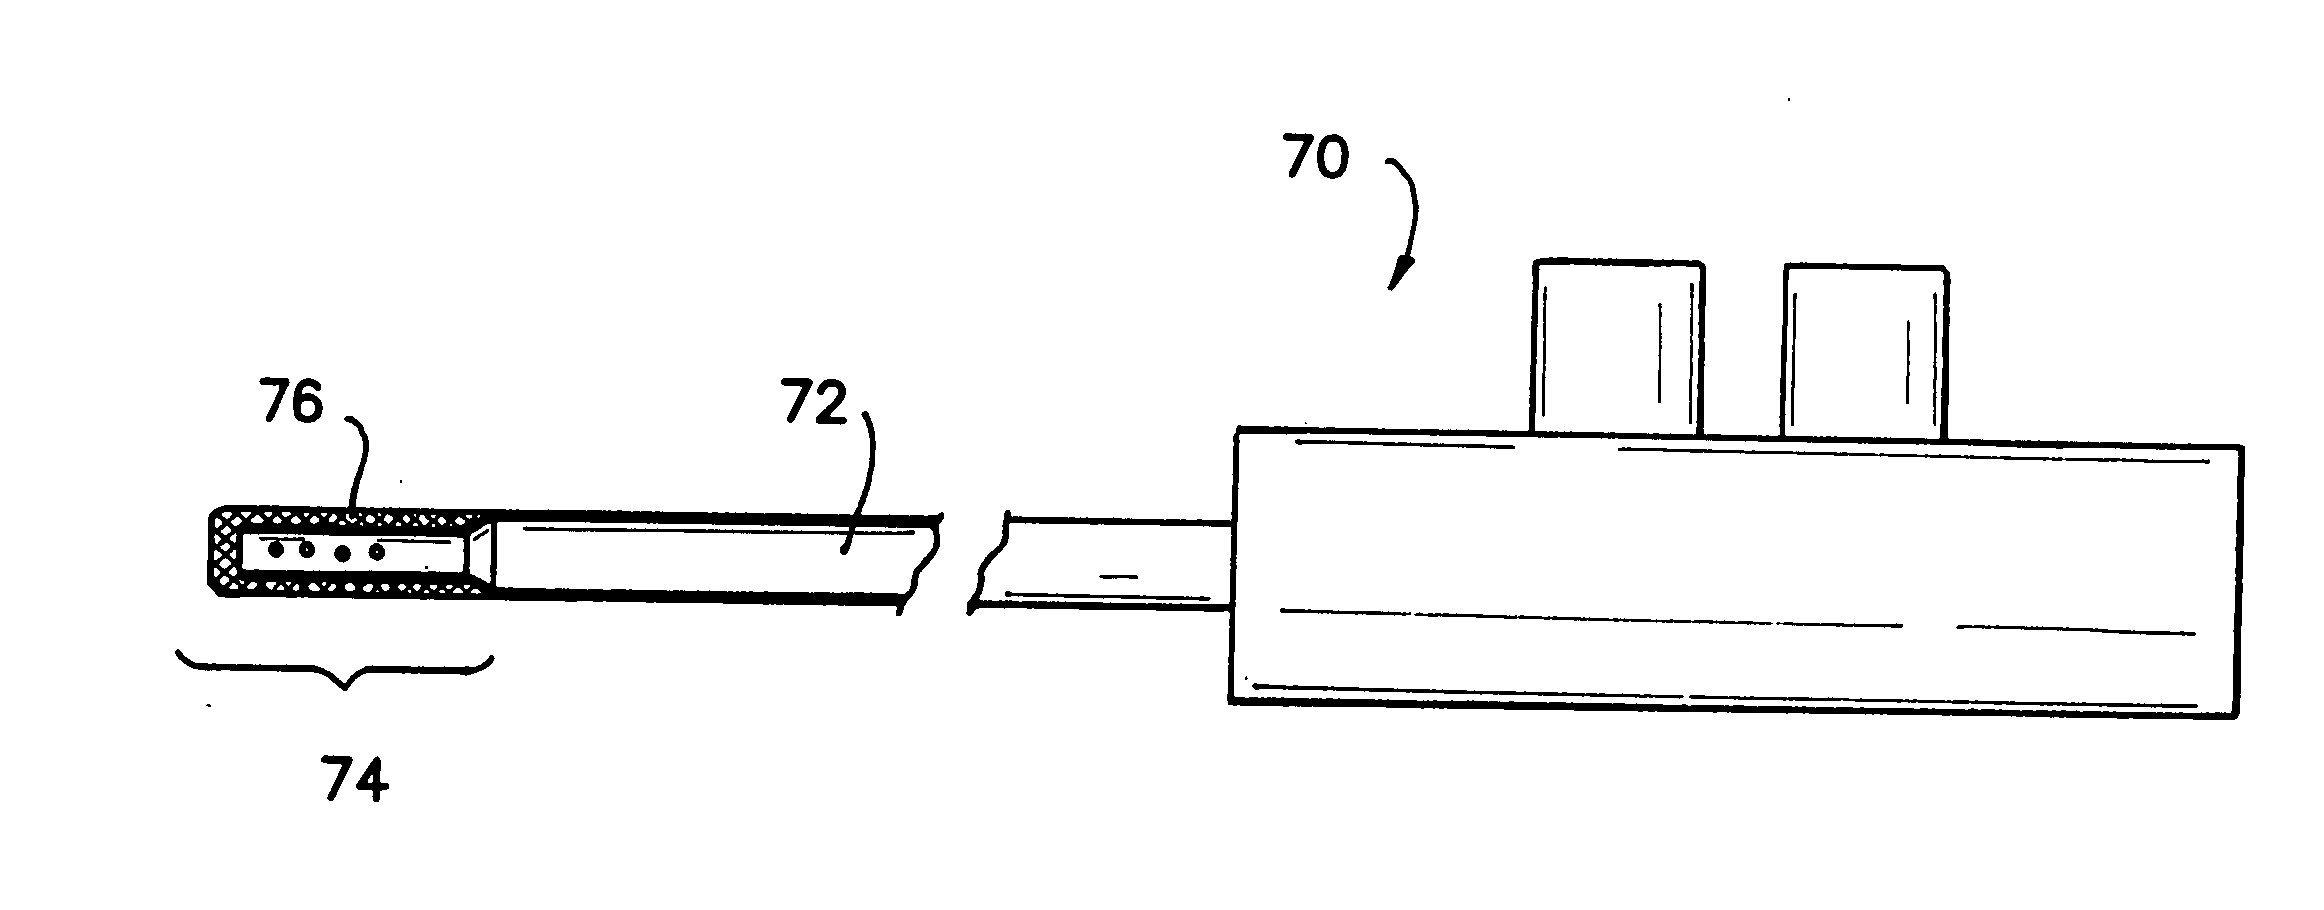 Multiple function surgical device